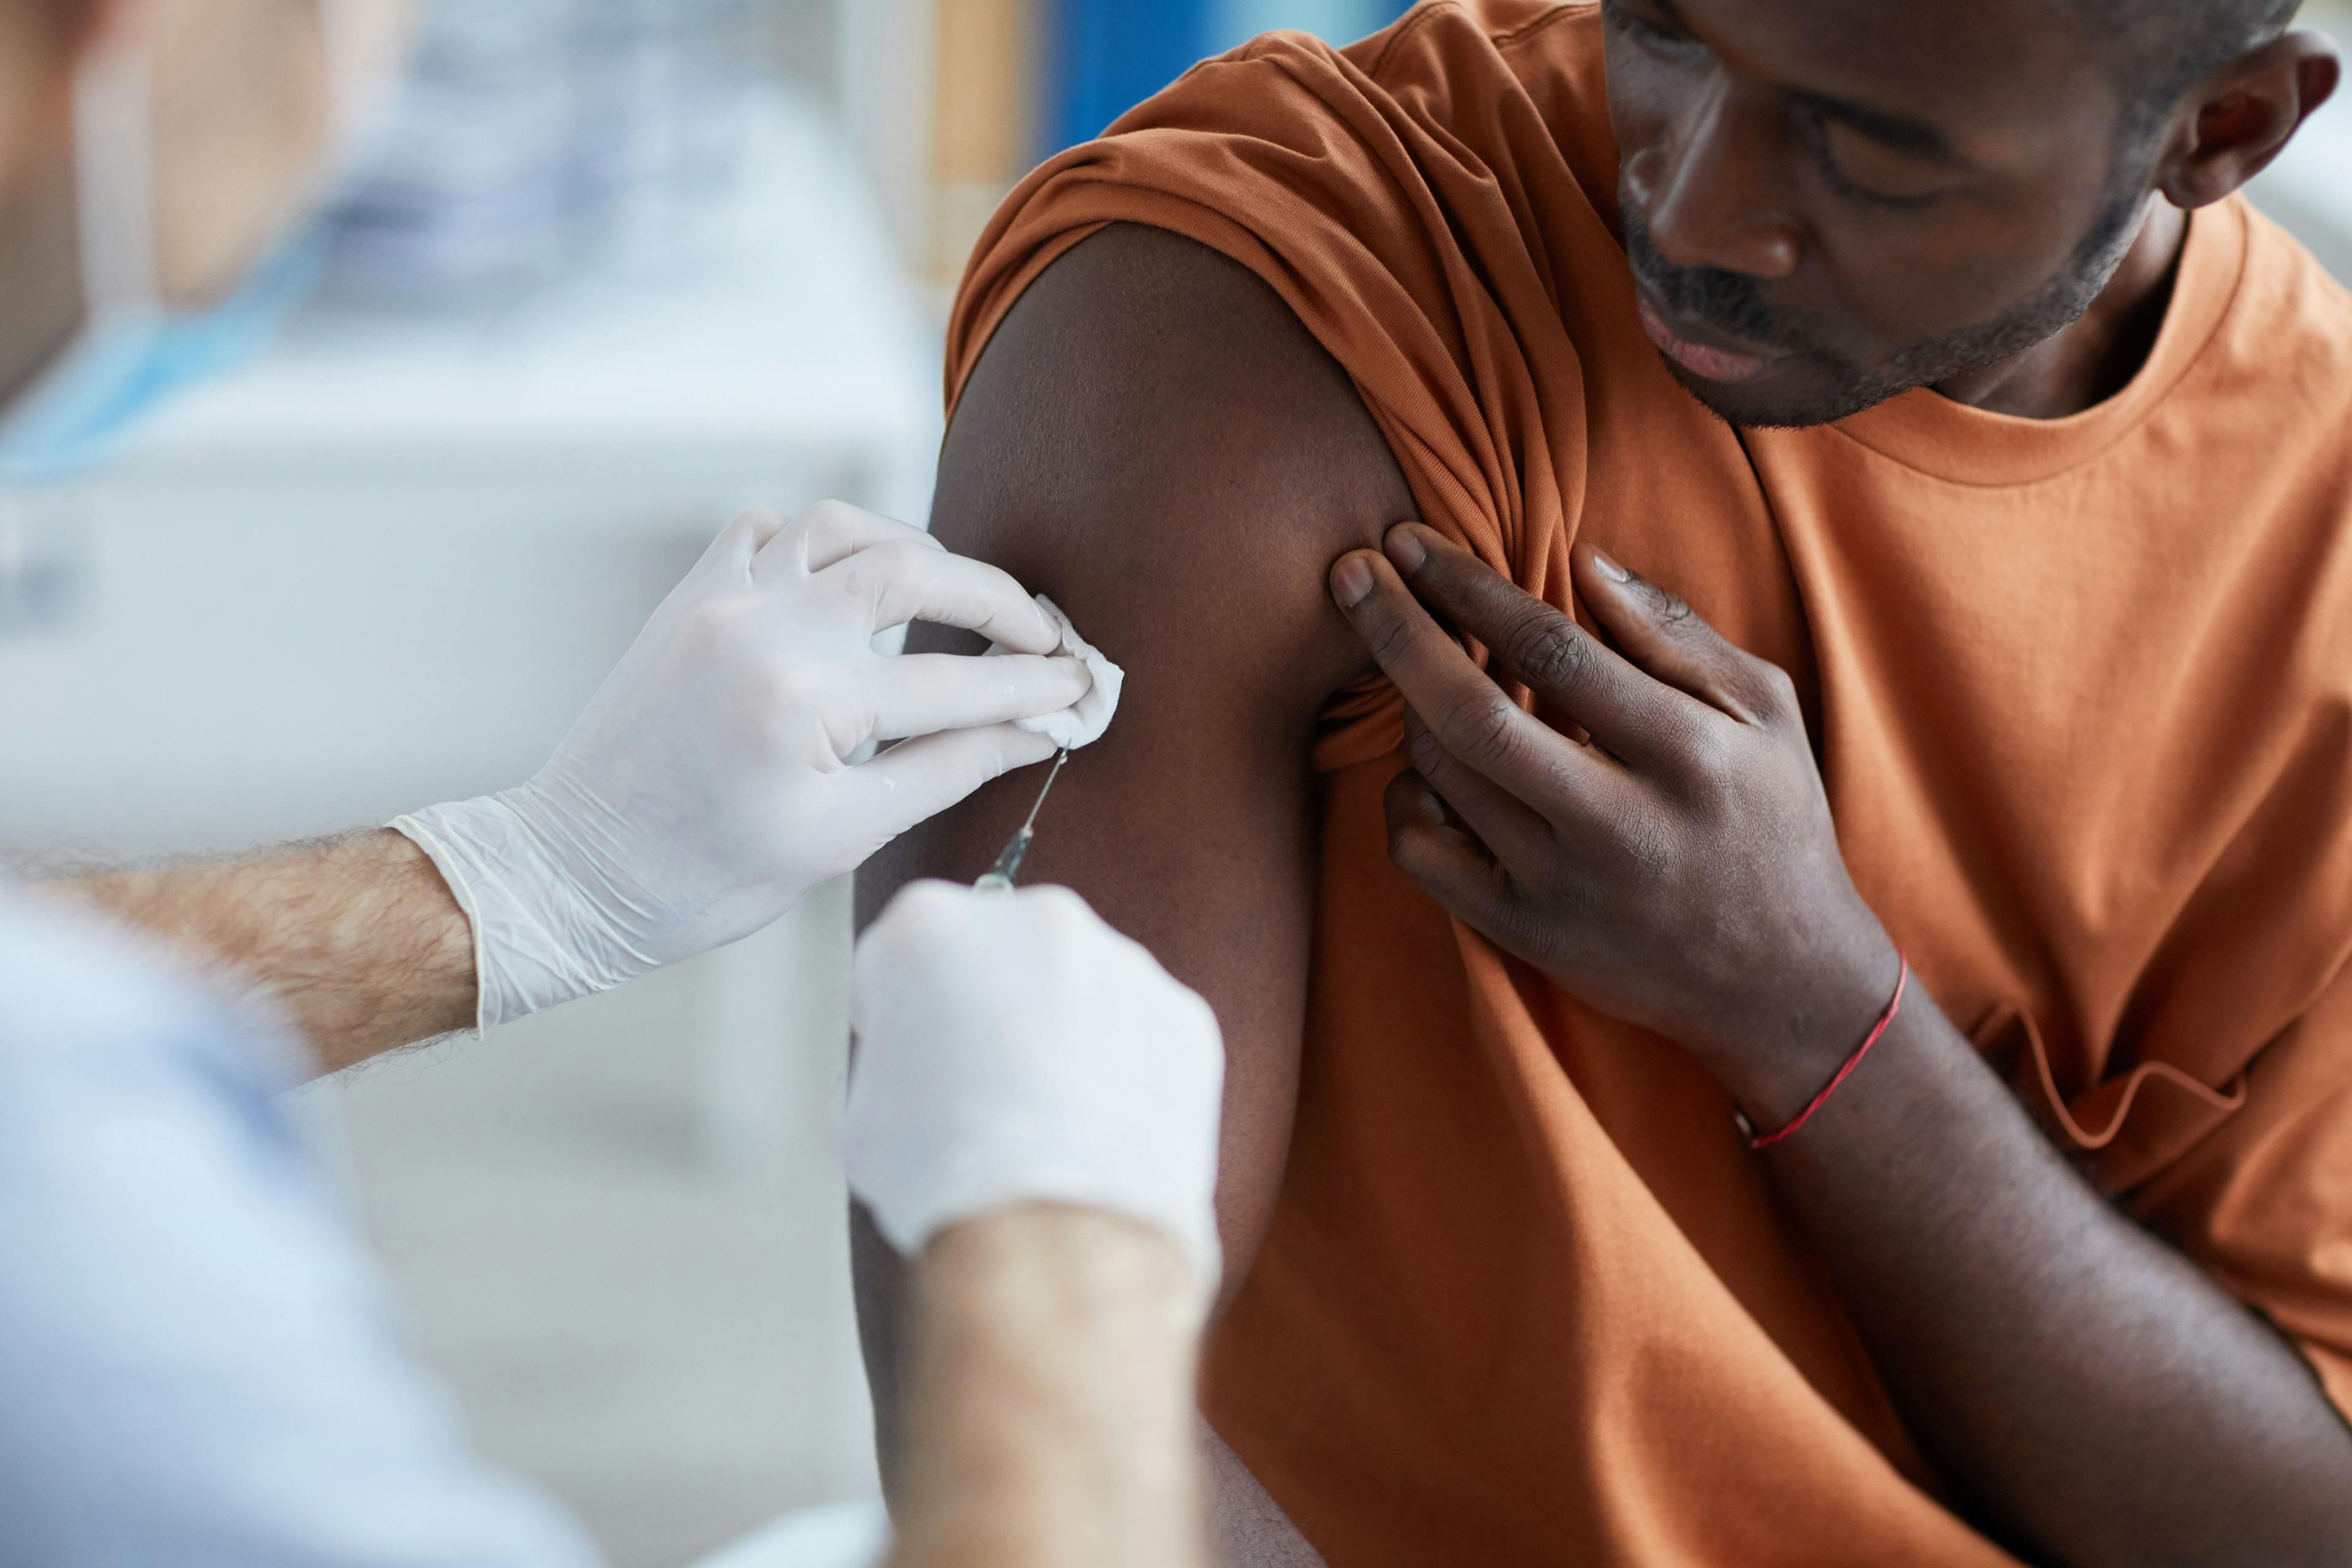 Concerns of injectable HIV PrEP safety and efficacy demonstrate a need for health care providers to share reliable information with at-risk populations.